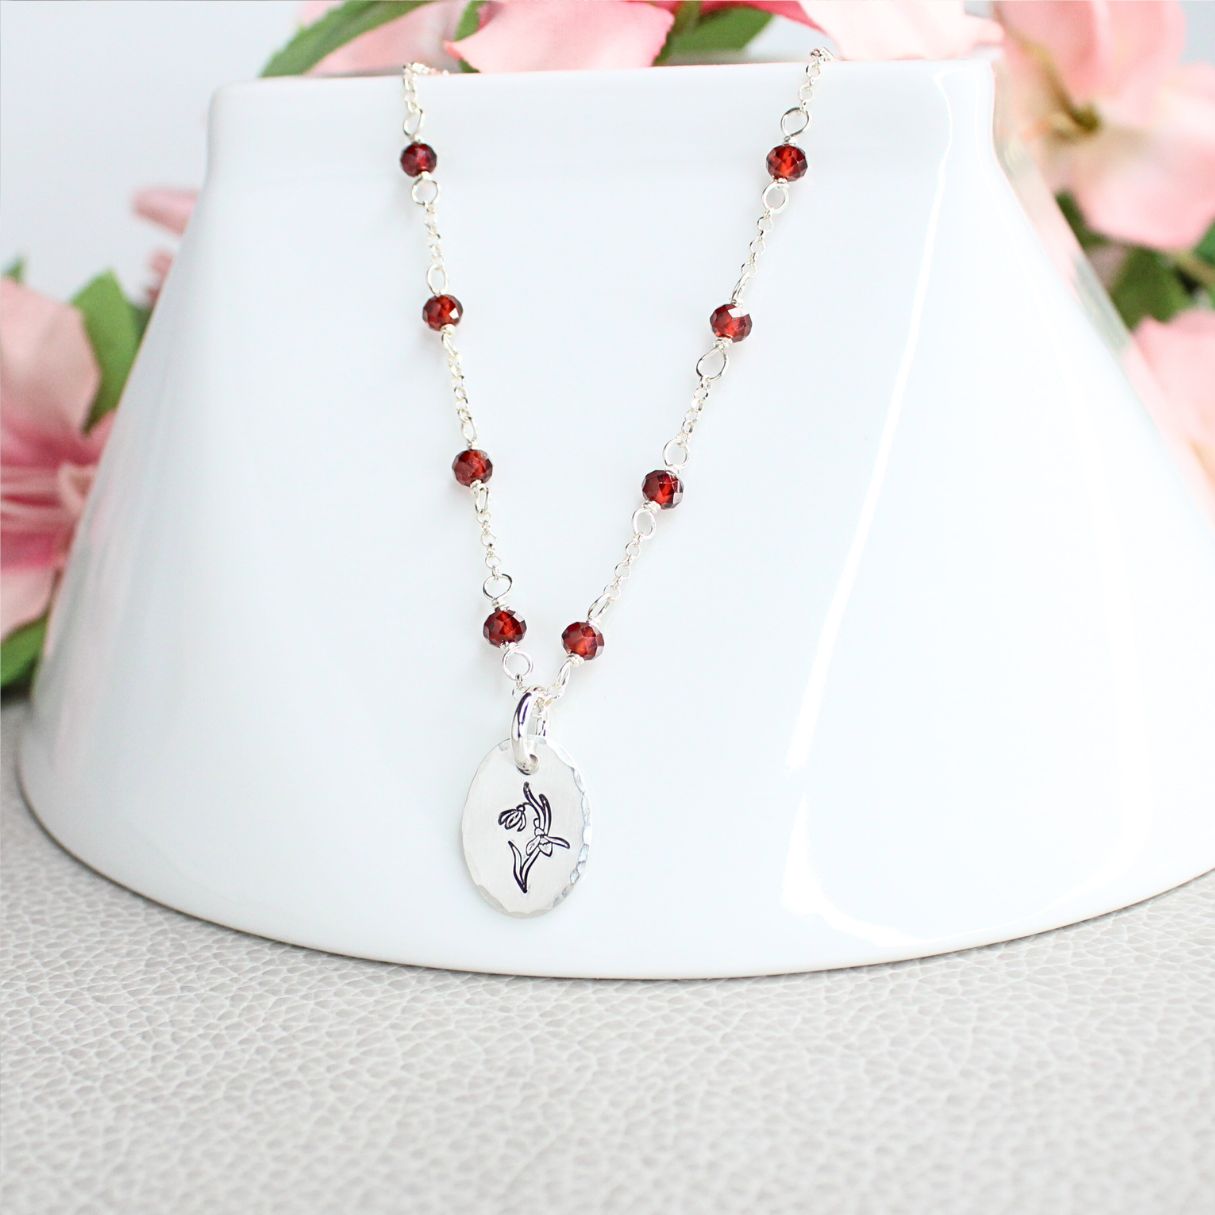 January Snowdrop Birth Flower Necklace Sterling Silver